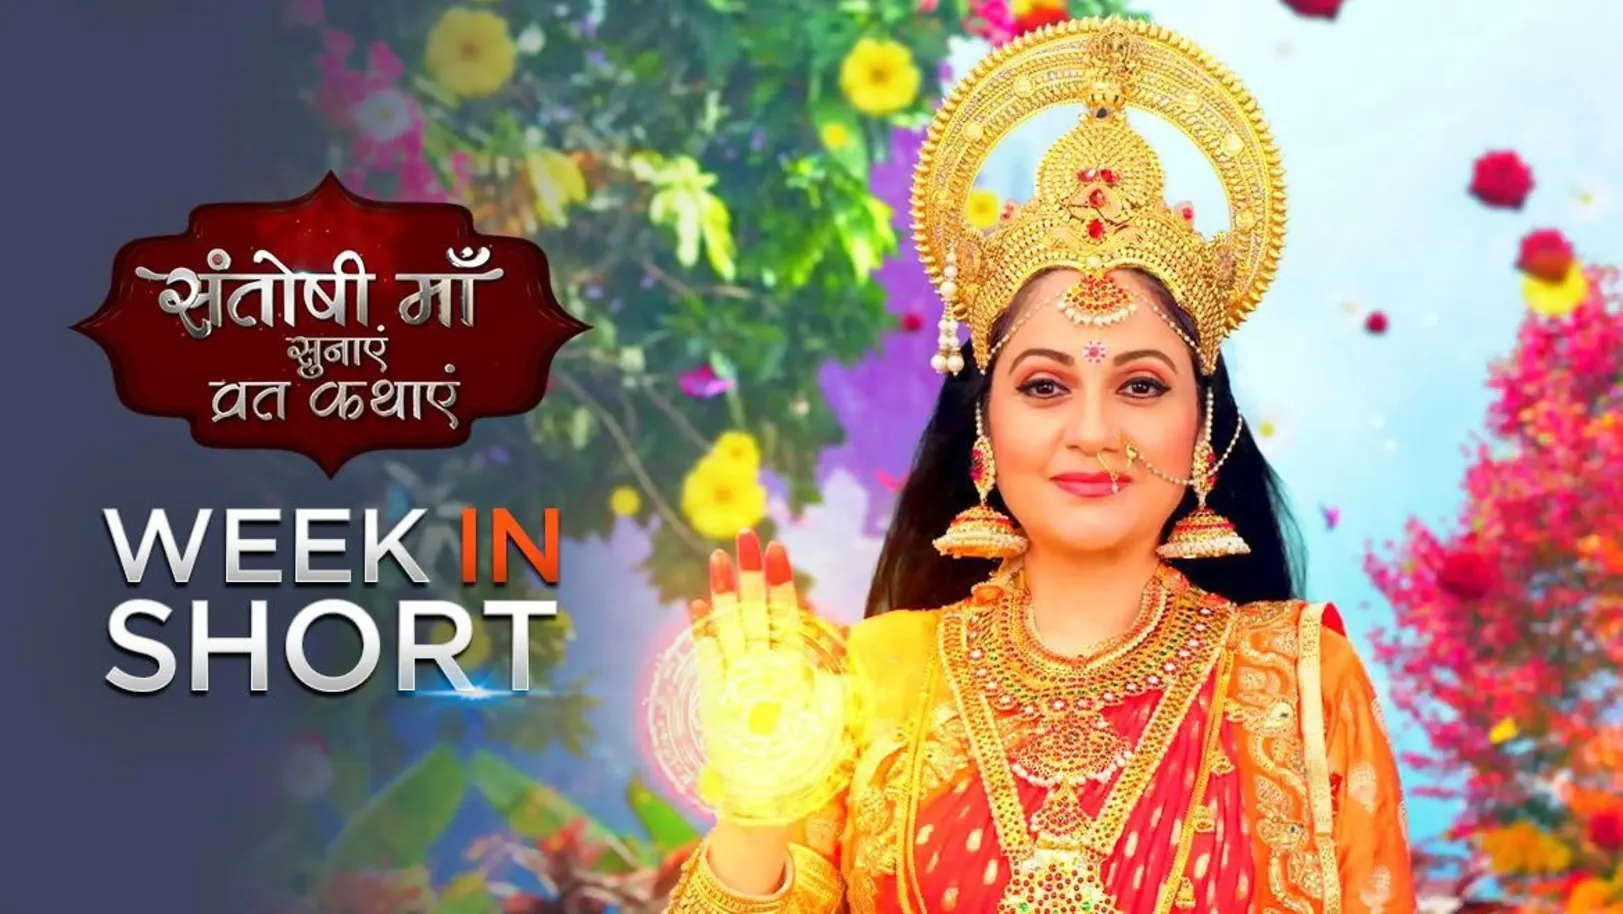 Week in Short - Santoshi Maa 24th August 2020 to 28th August 2020 29th August 2020 Webisode